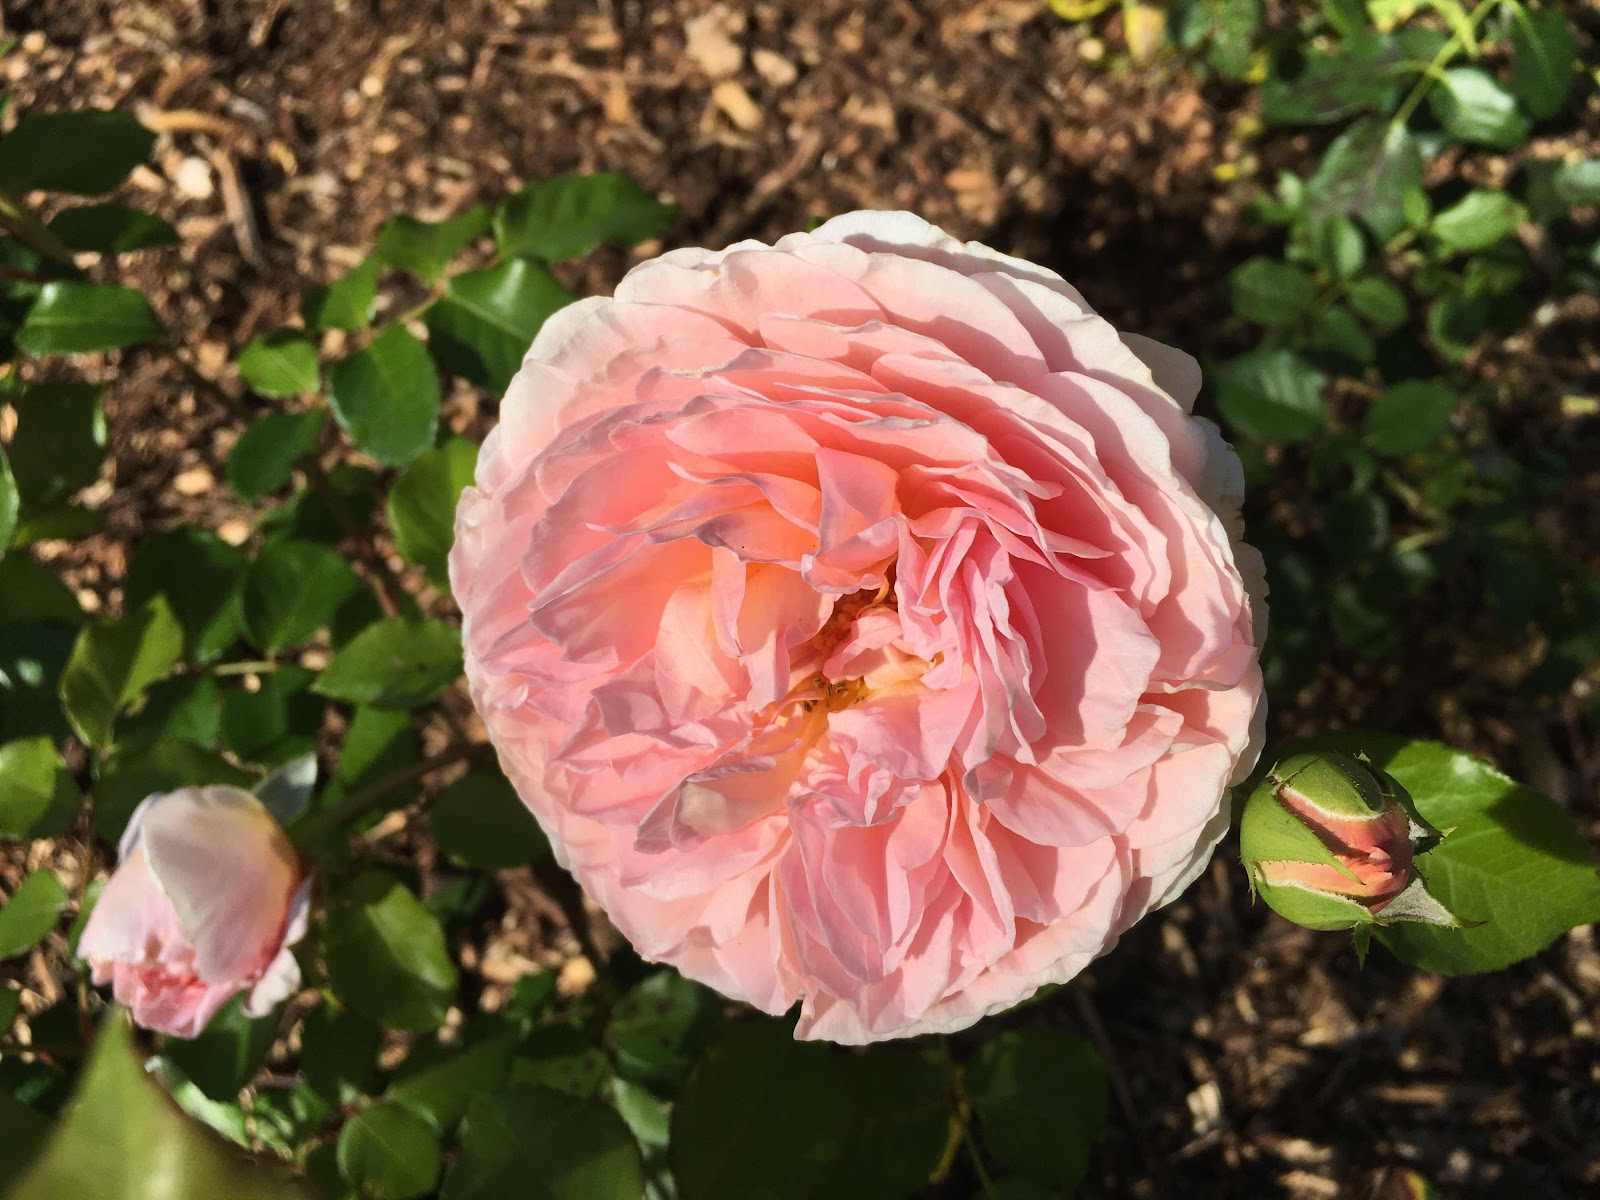 Abraham darby rose discontinued